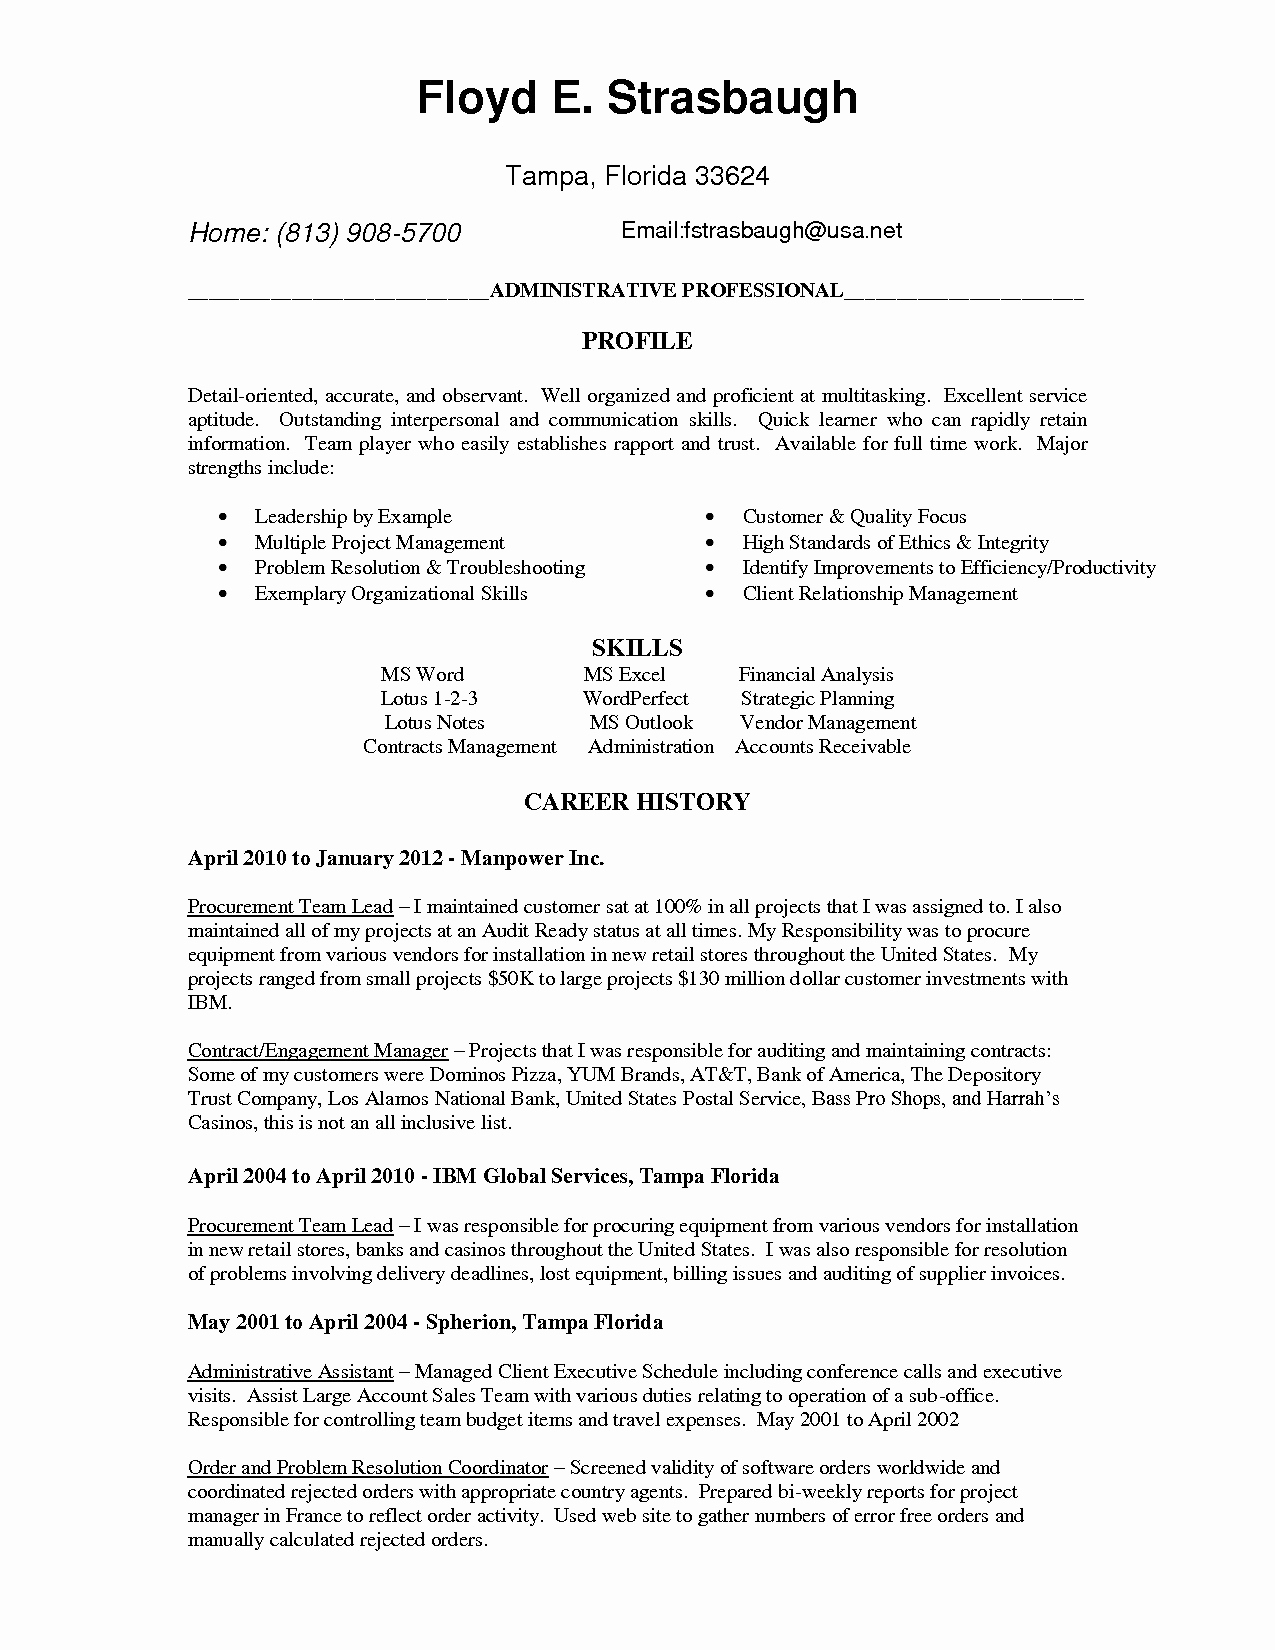 Customer Service Cover Letter Template Word - 20 Cover Letter Heading Template